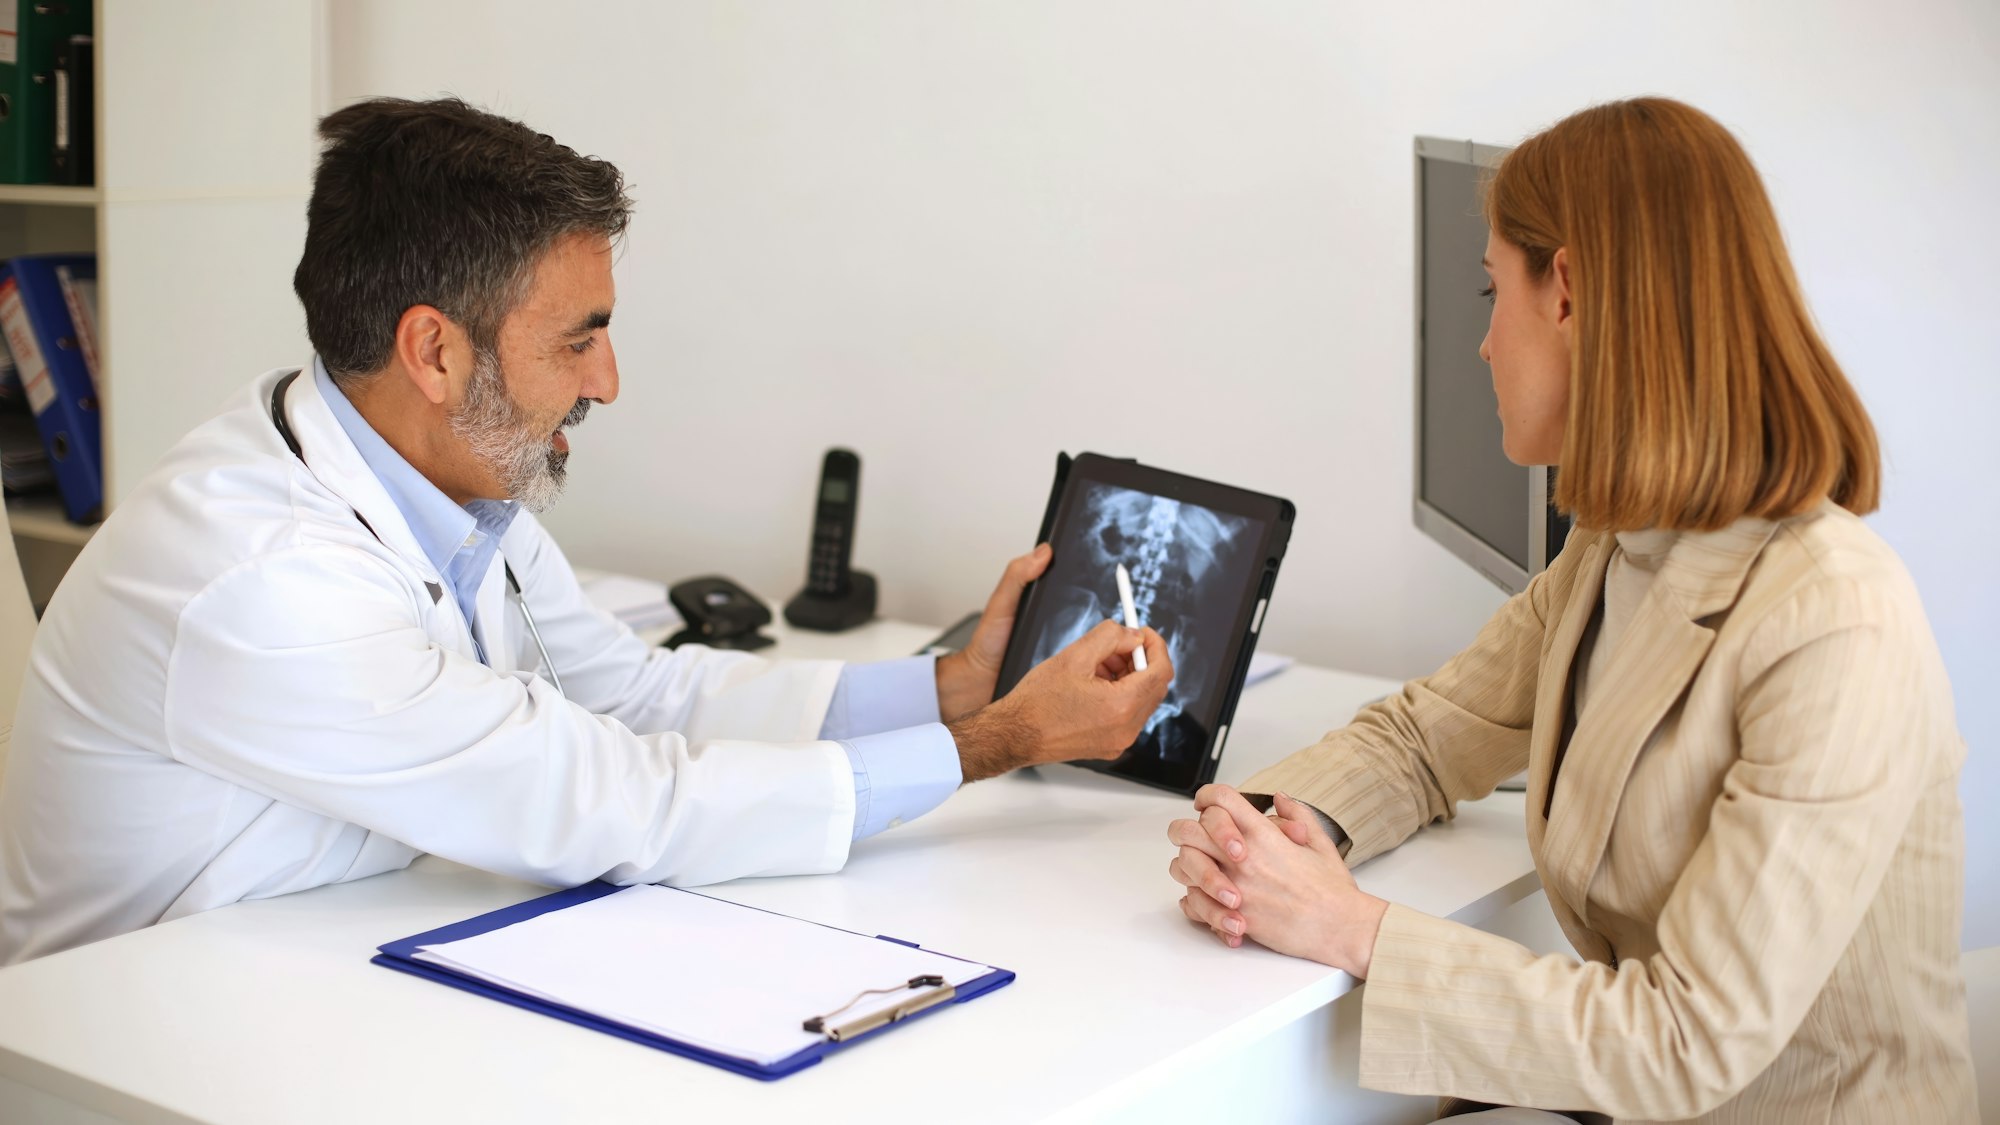 Doctor consulting patient with spine X-ray on tablet in a medical office setting